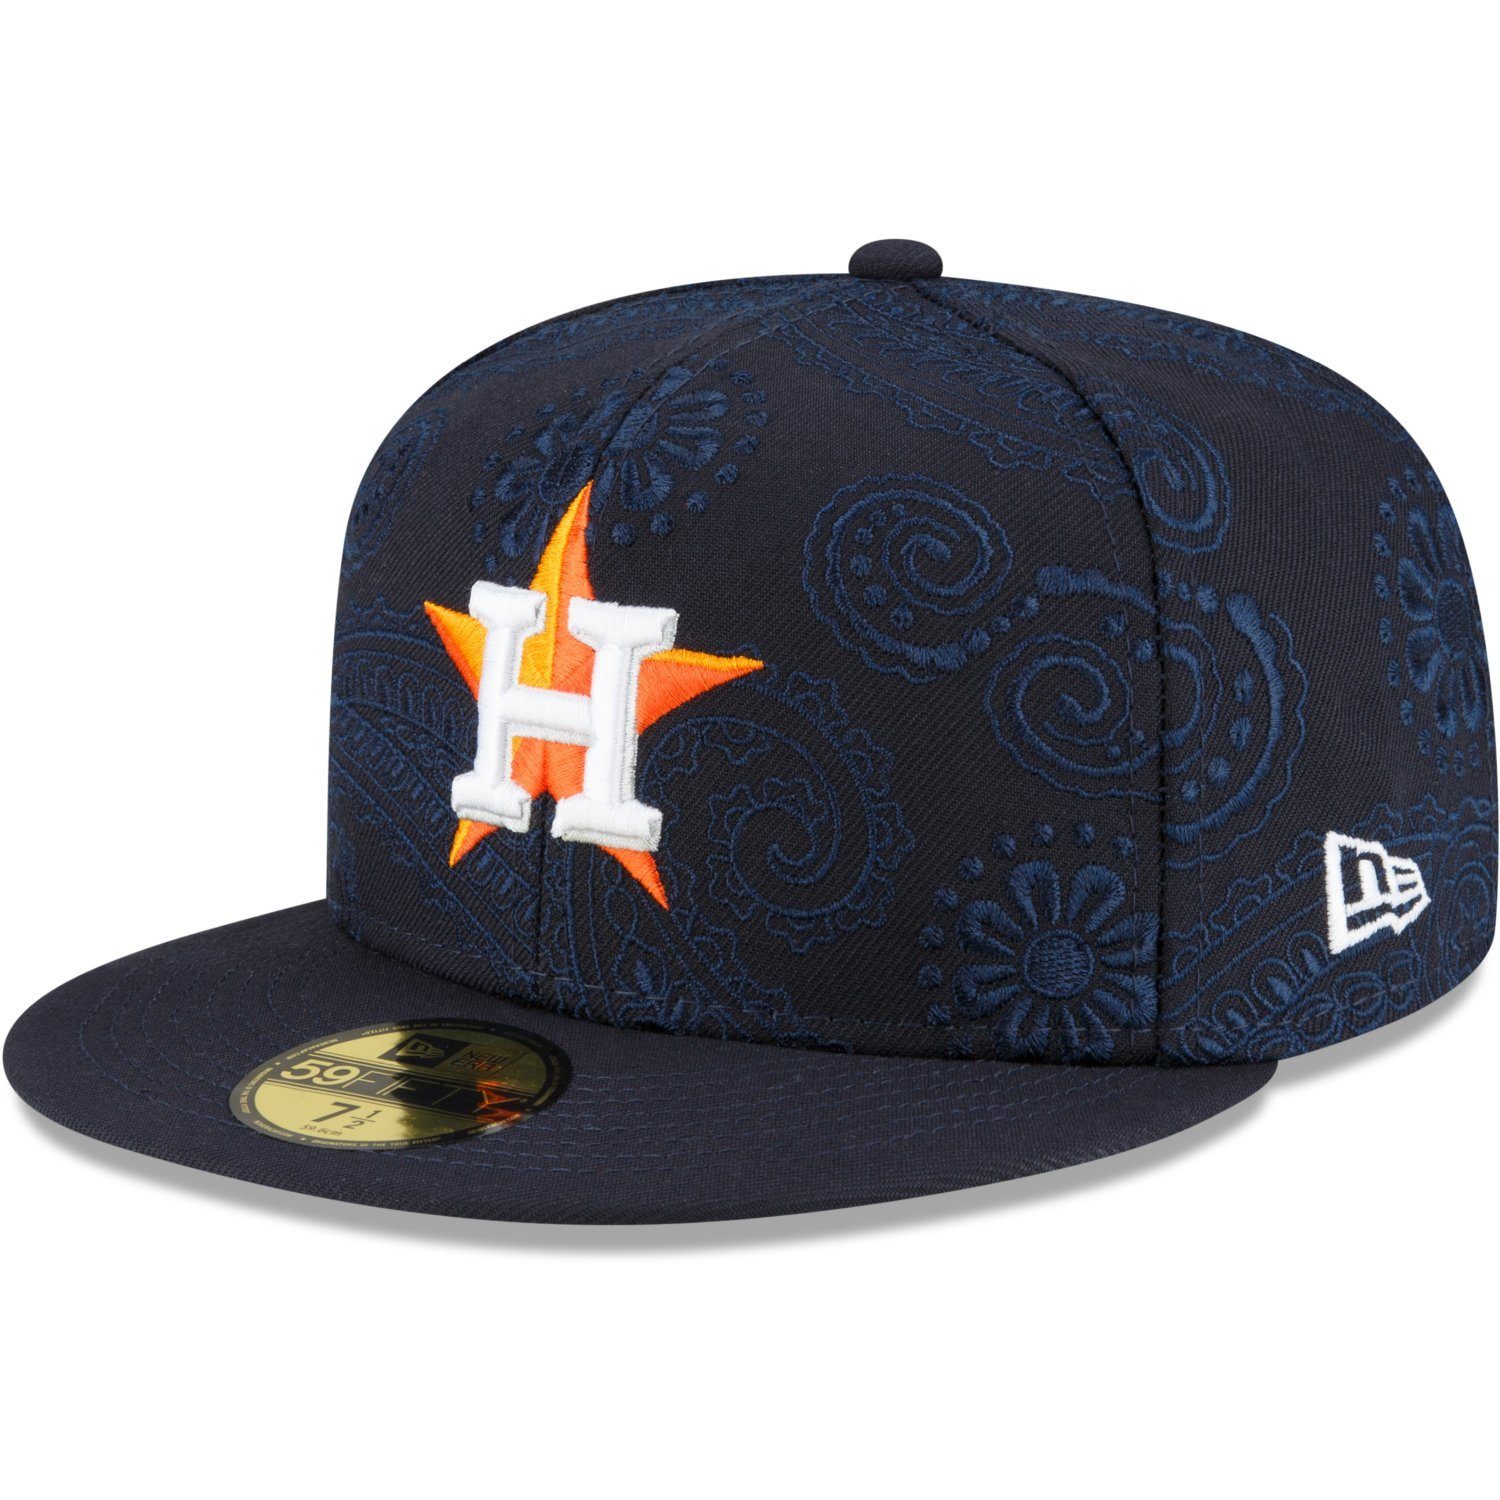 New Era Fitted Cap 59Fifty SWIRL PAISLEY Houston Astros